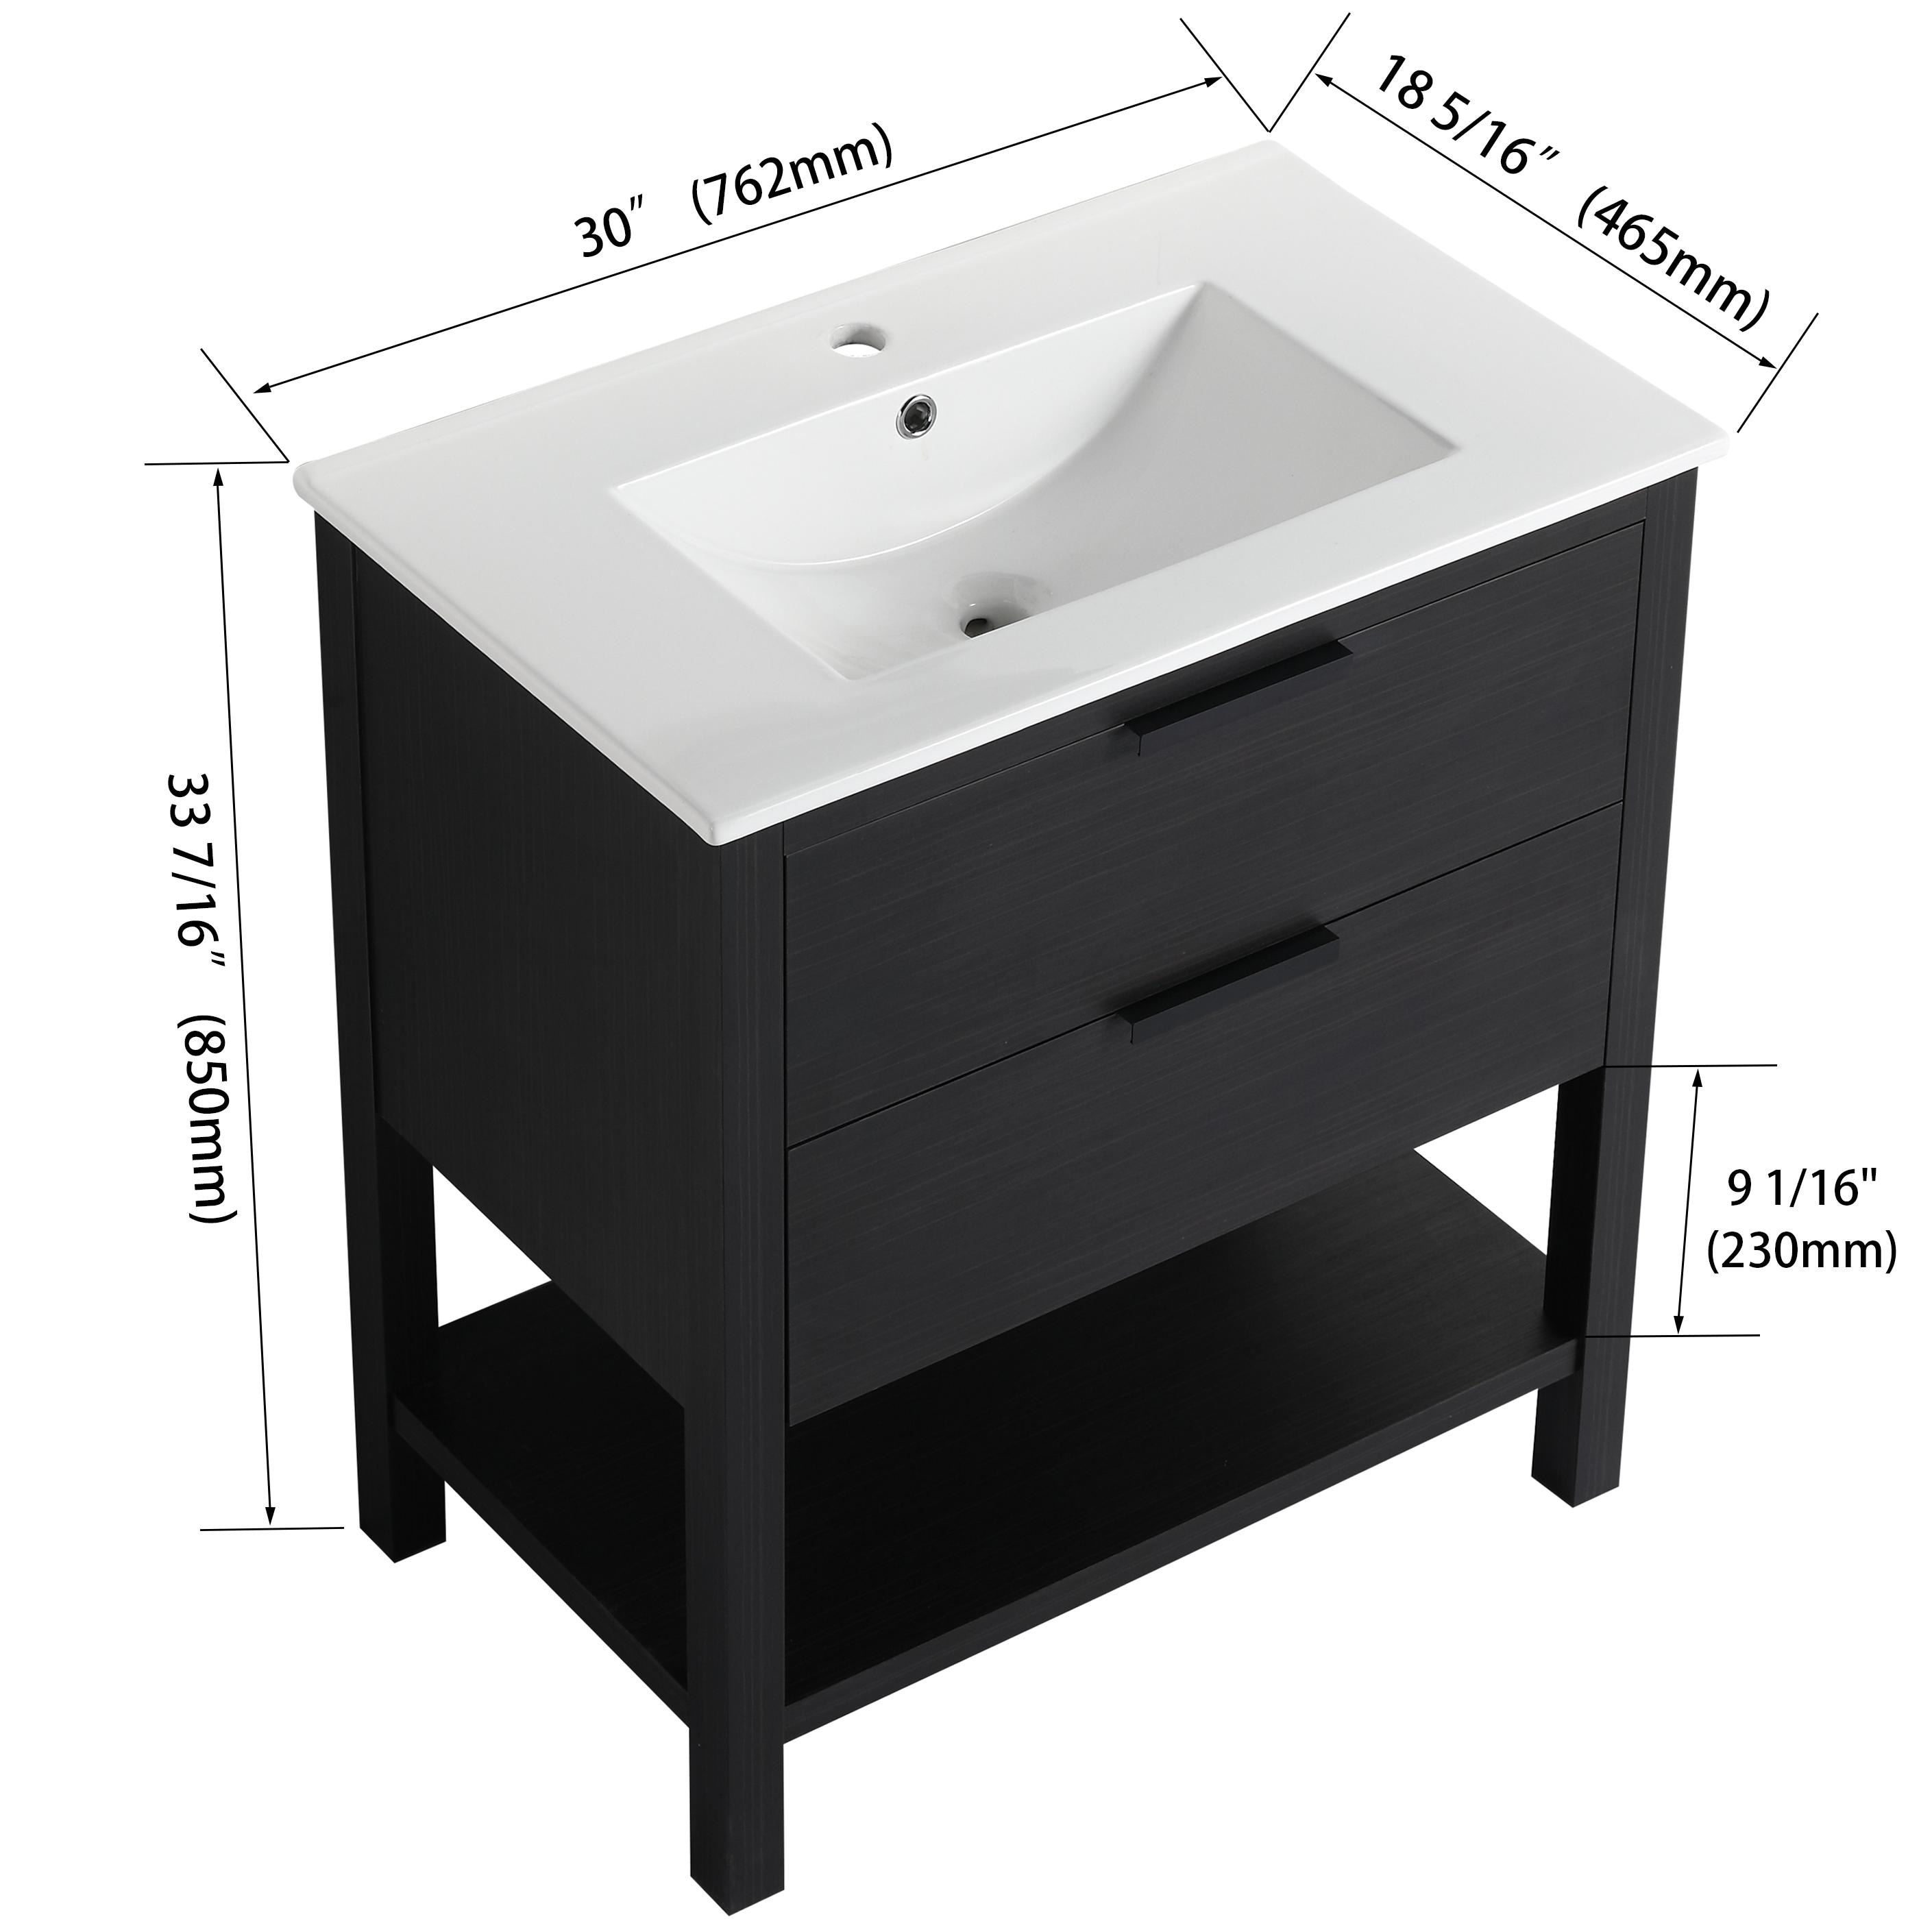 https://ak1.ostkcdn.com/images/products/is/images/direct/6c98477154ad22fa0de21c5b00354f187003890c/Beingnext-30%22-Bathroom-Vanity-with-Sink%2C-Single-Sink-Freestanding-Bathroom-Vanity-with-2-Soft-Close-Drawers.jpg